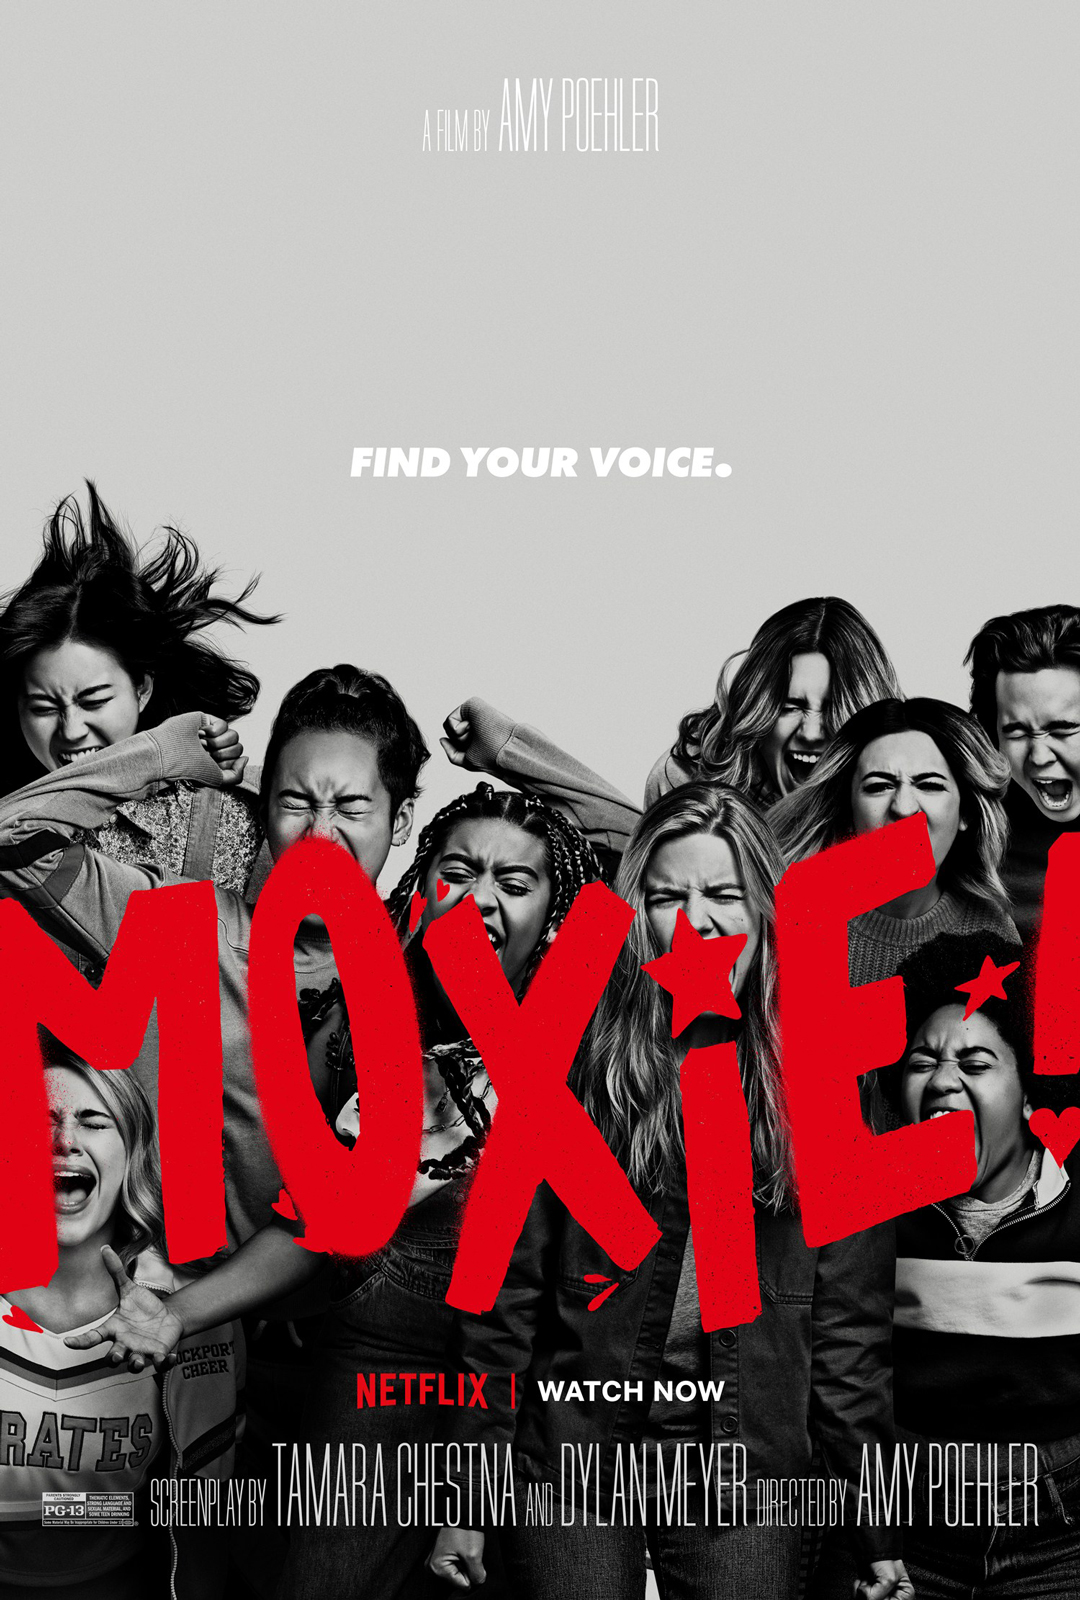 POSTER: Cast of "Moxie" (2021) below the text "Find Your Voice." Poster courtesy of Netflix.